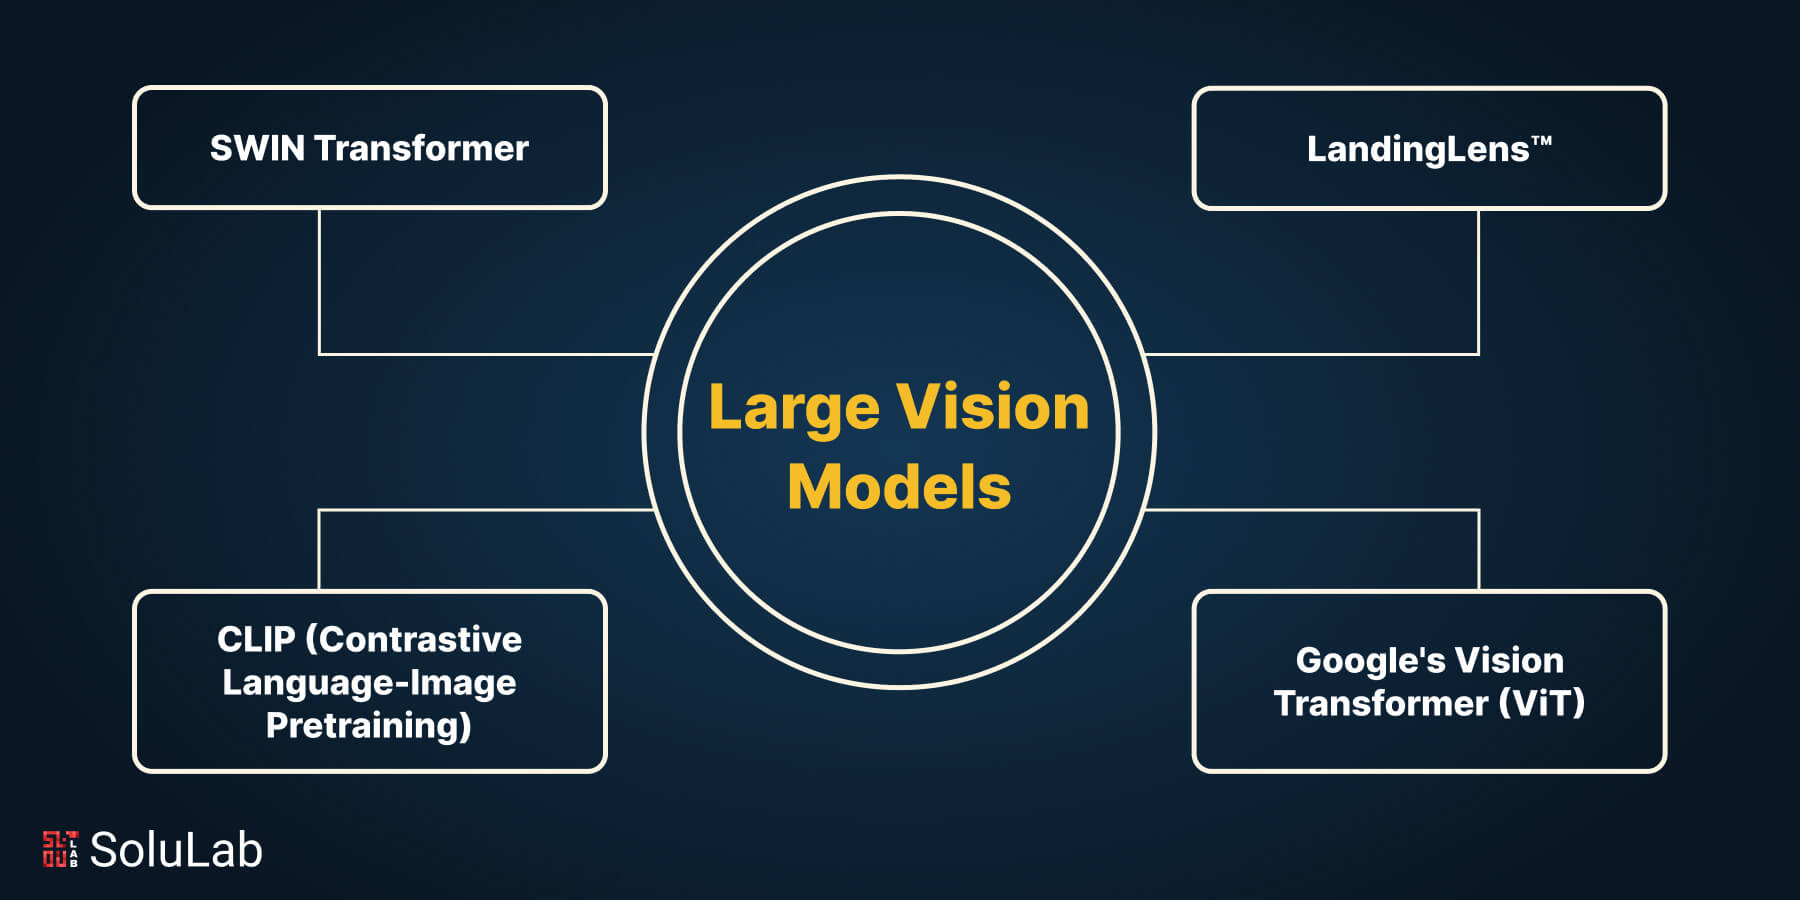 A Brief Guide to Large Vision Models